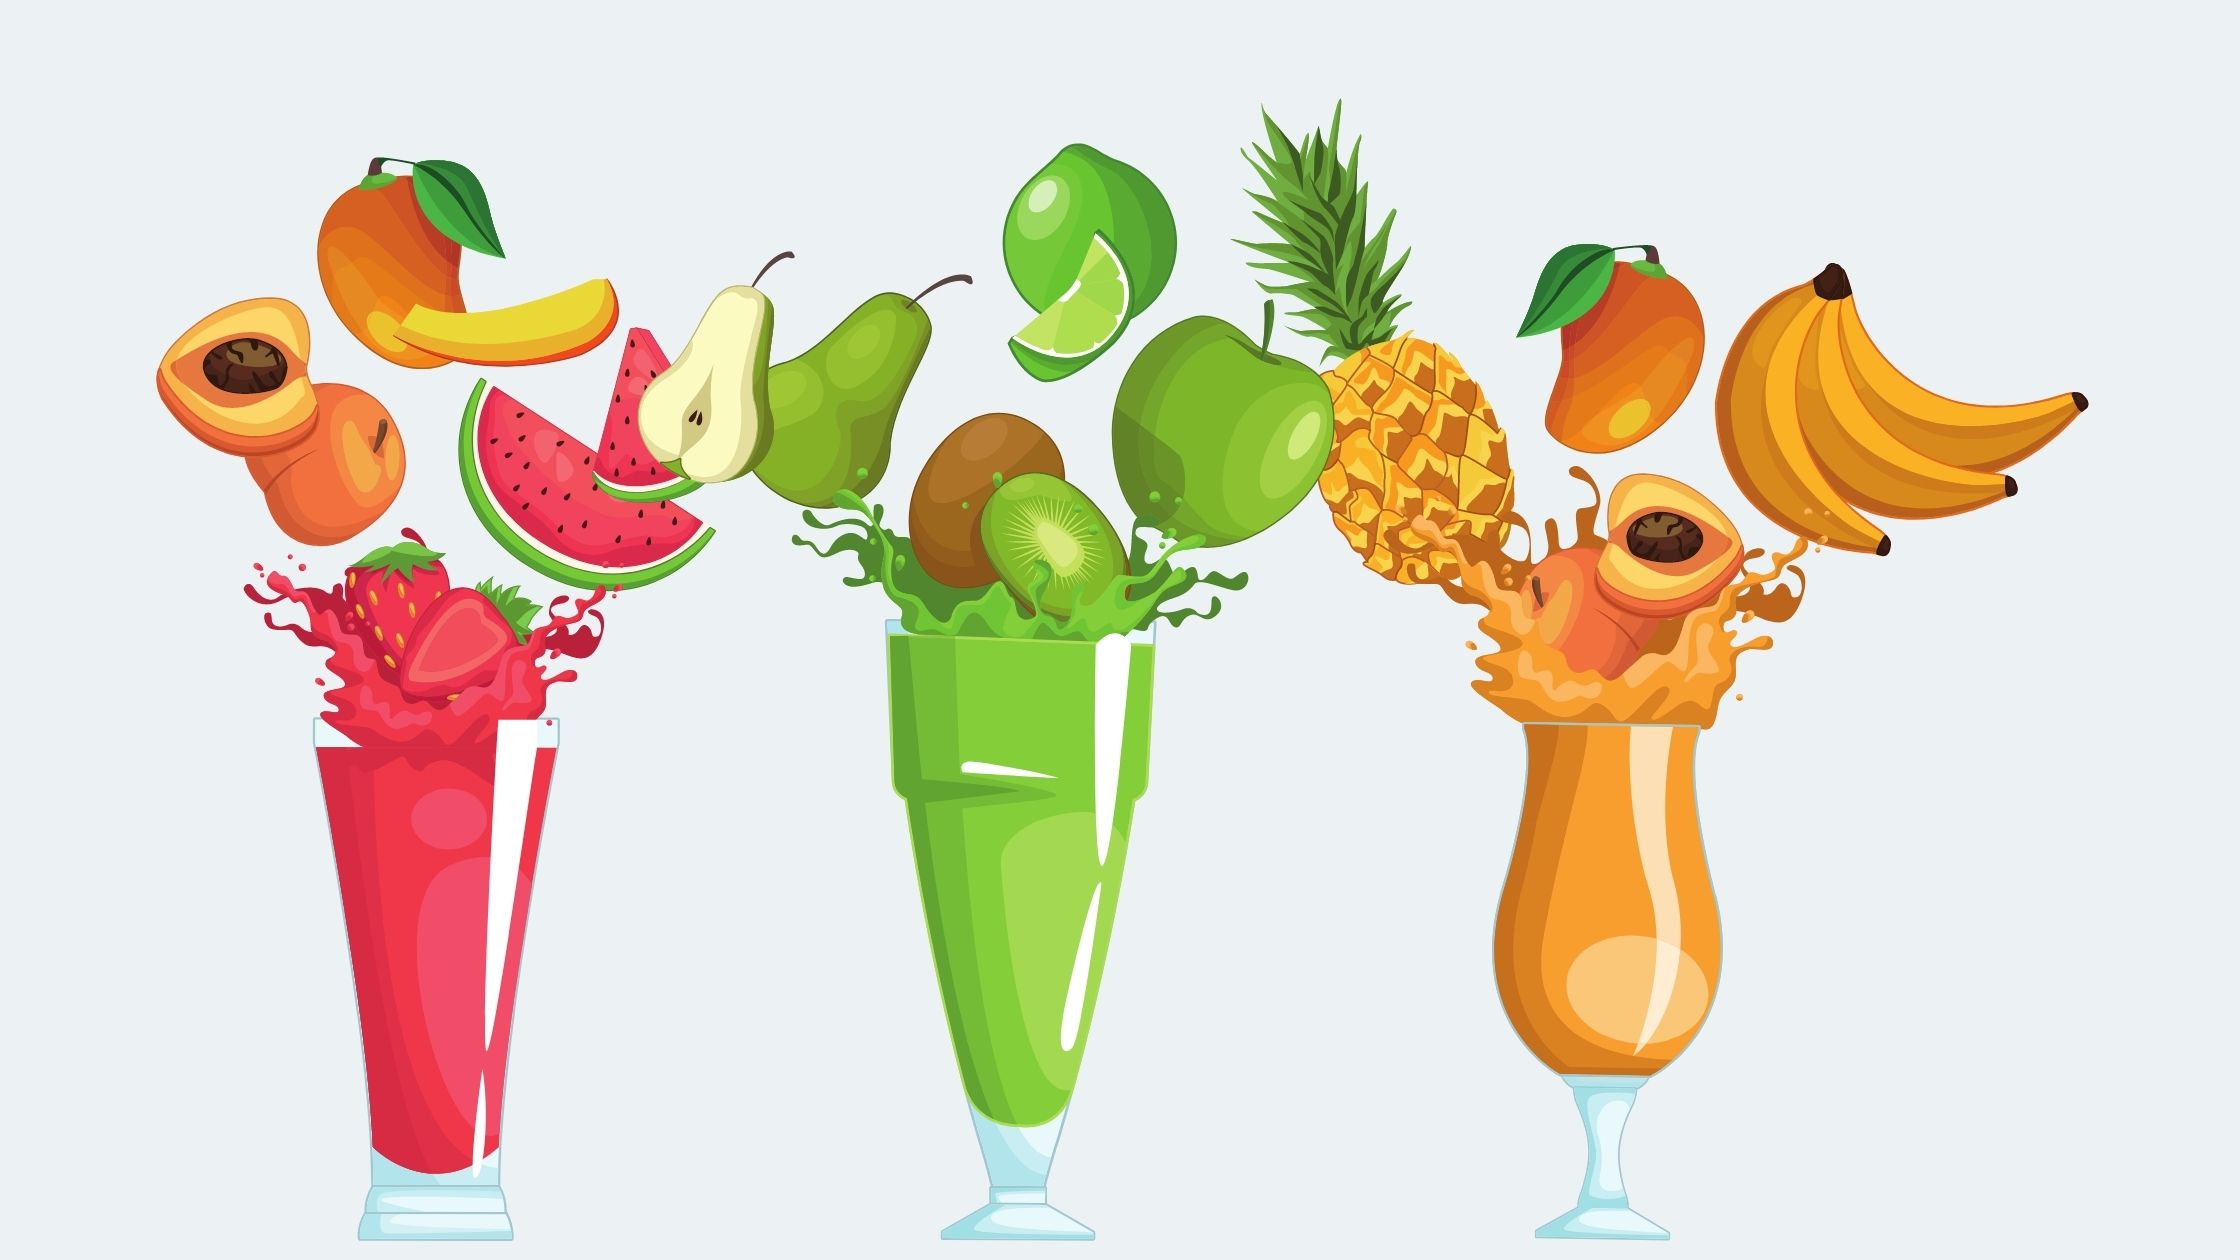 liquid diet for weight loss